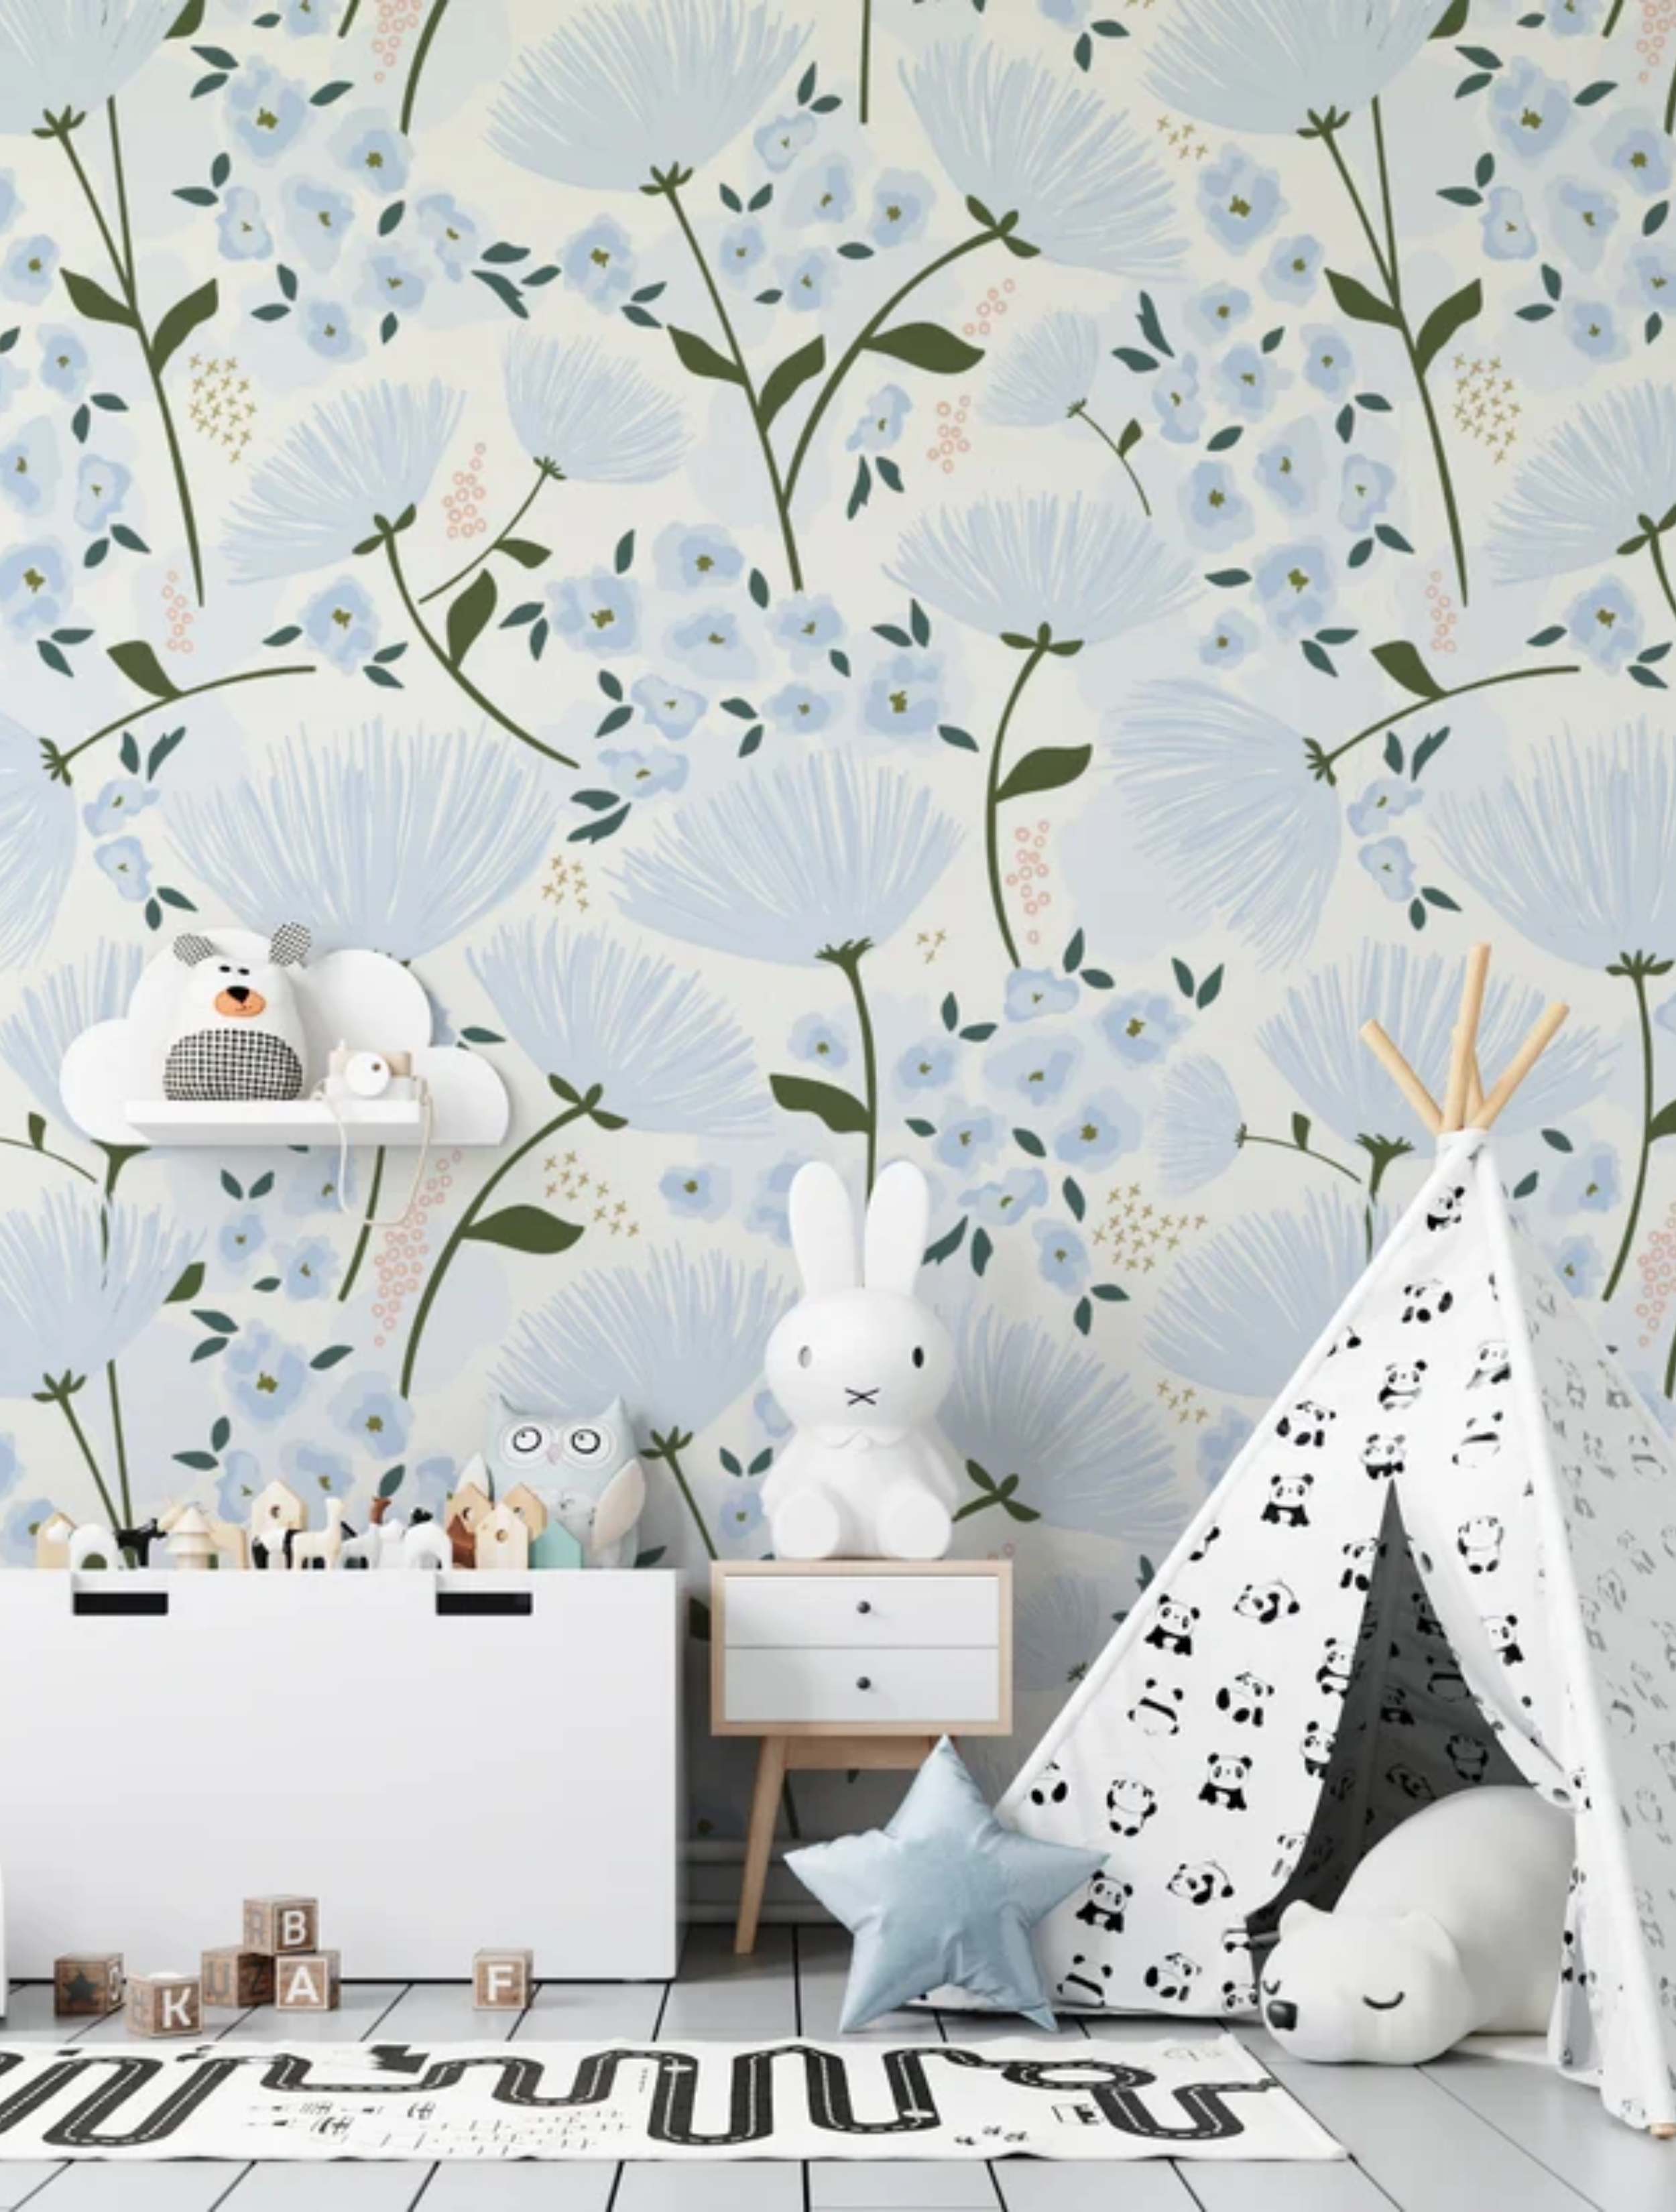 A charming children's play area is brightened by the "Floral Love Wallpaper," which is adorned with delicate blue flowers and soft green foliage on a light background. The space is playfully styled with a child's teepee, a toy chest, and whimsical stuffed animals, enhancing the gentle and joyful atmosphere created by the wallpaper.